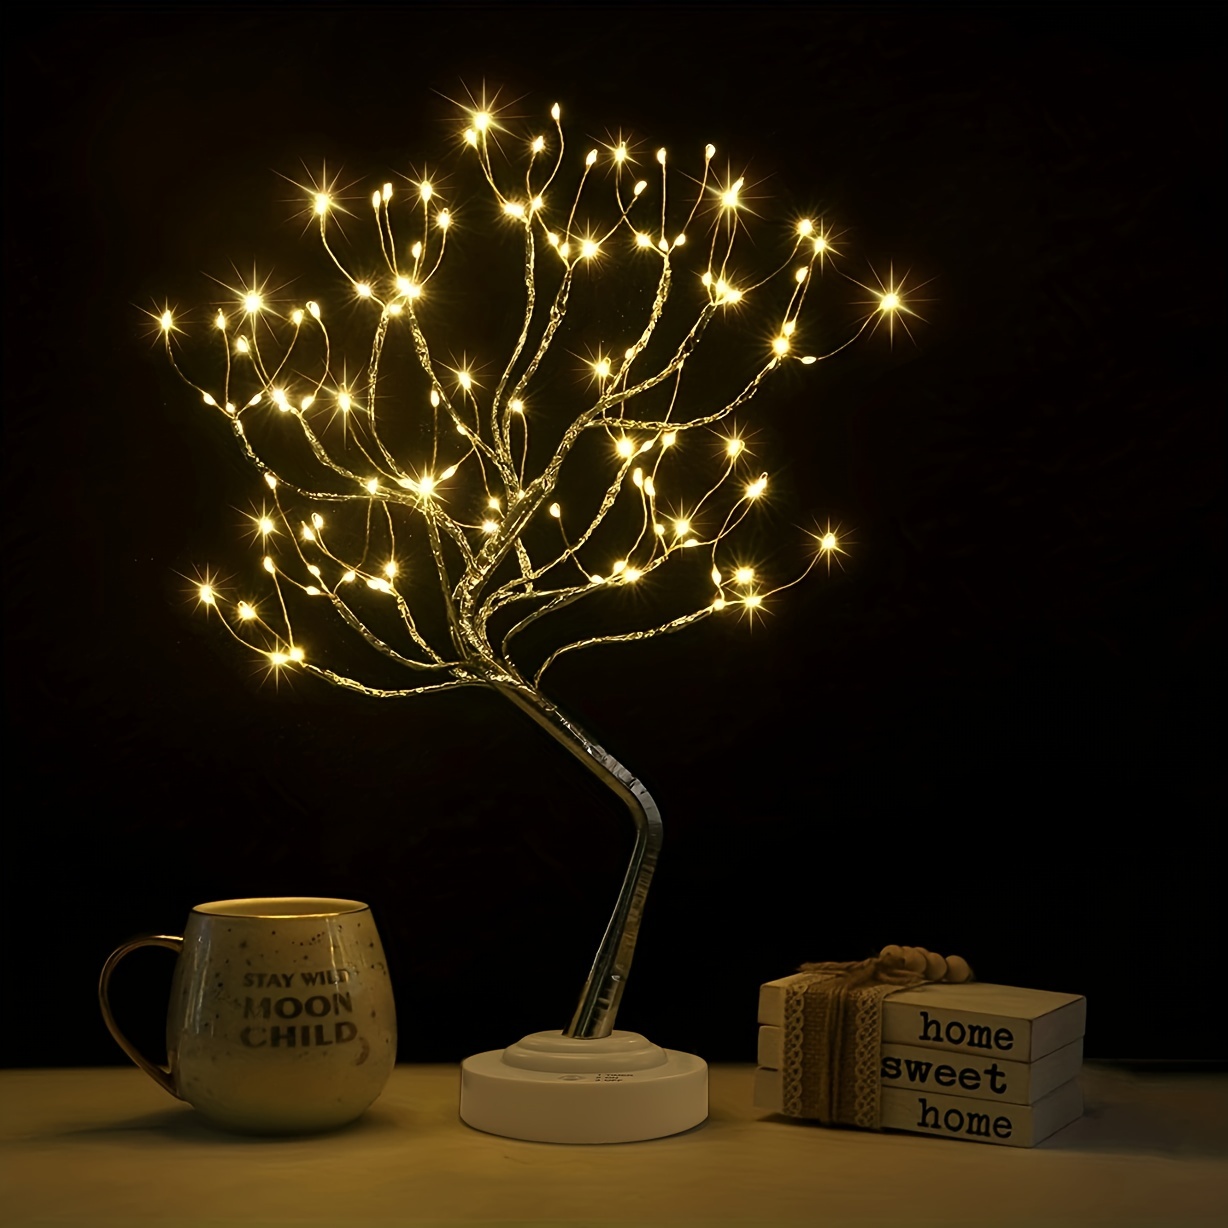  Led Tabletop Bonsai Tree Light 20 Inch LED Copper Wire